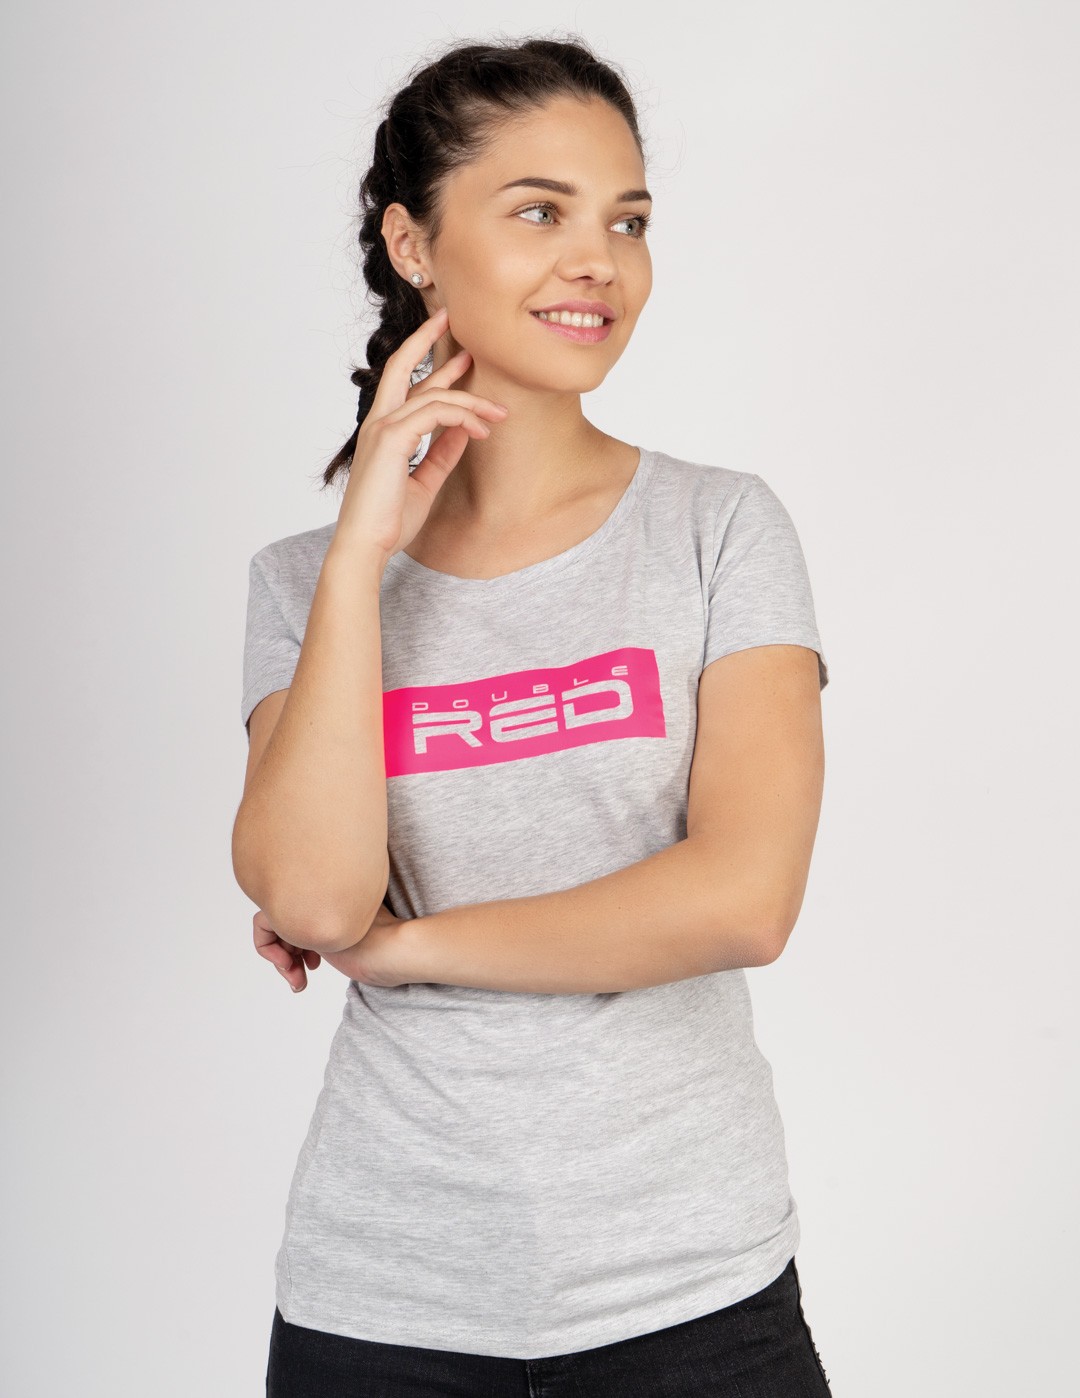 Women's T-Shirt NEON STREETS Collection Pink/Grey